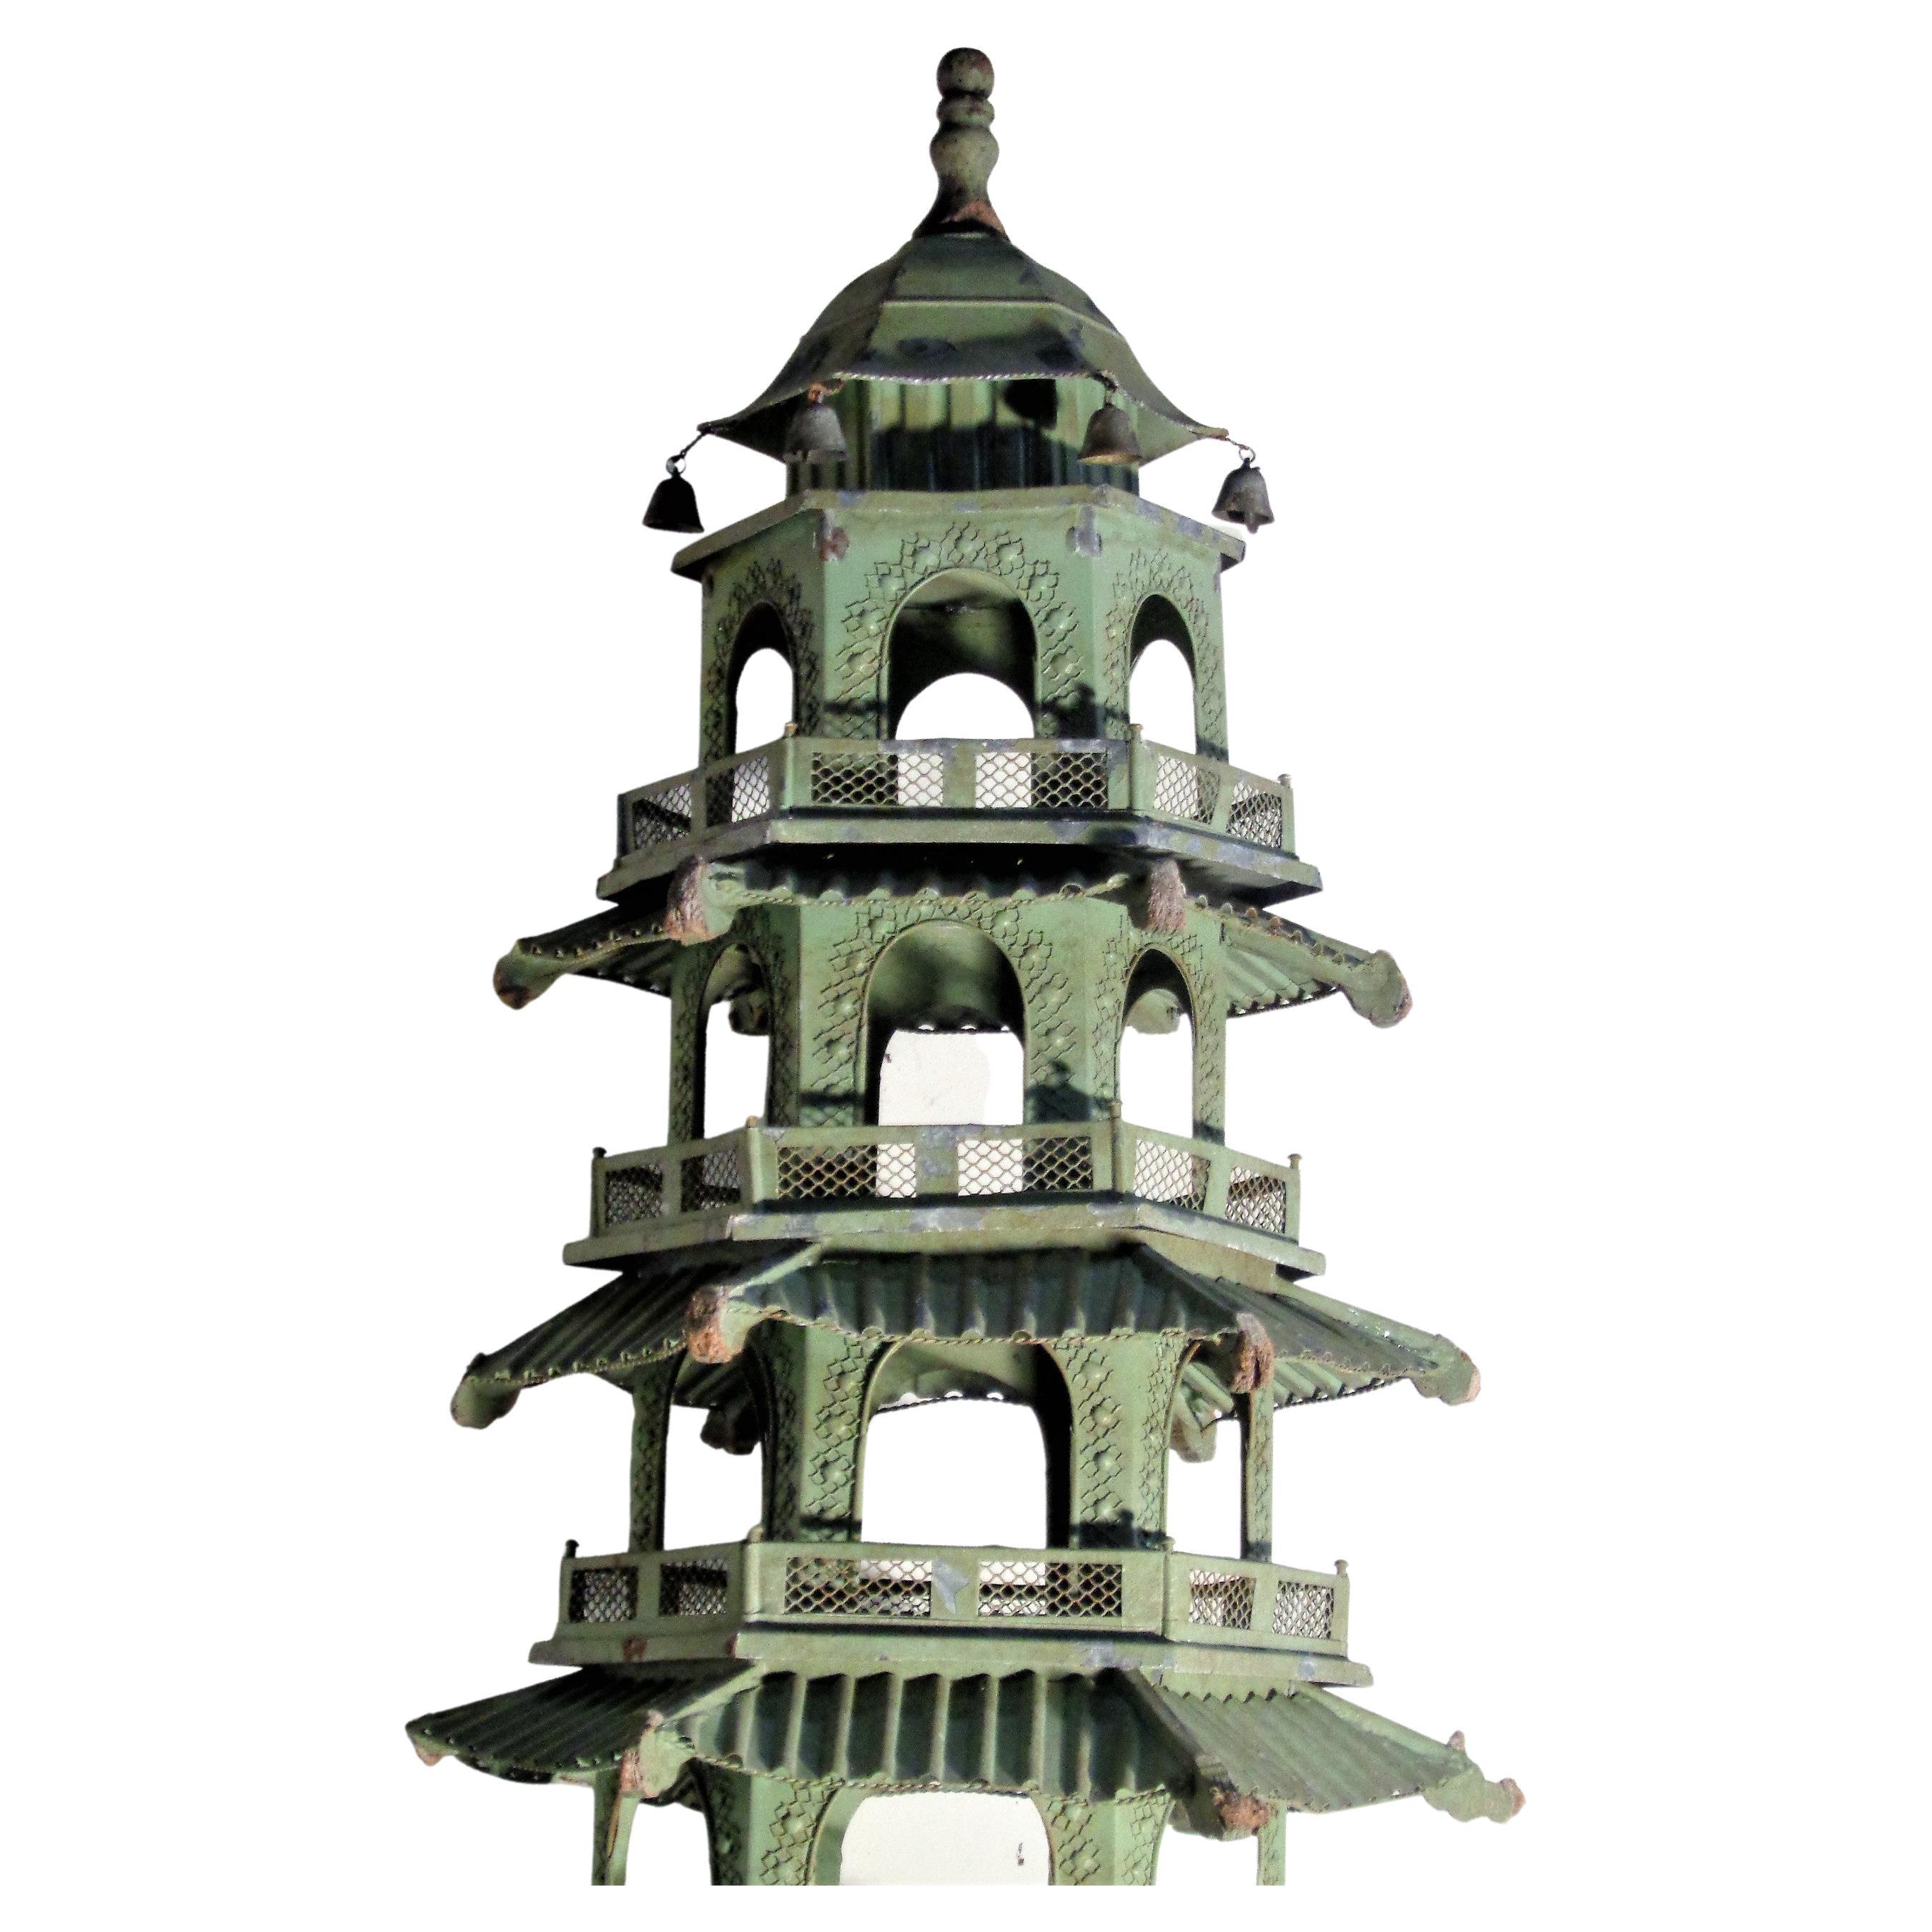 Large galvanized tin and wood architectural model of a beautifully detailed seven hexagonal storied Chinese buddhist pagoda in original old dry pale sage green painted surface. Measures 64